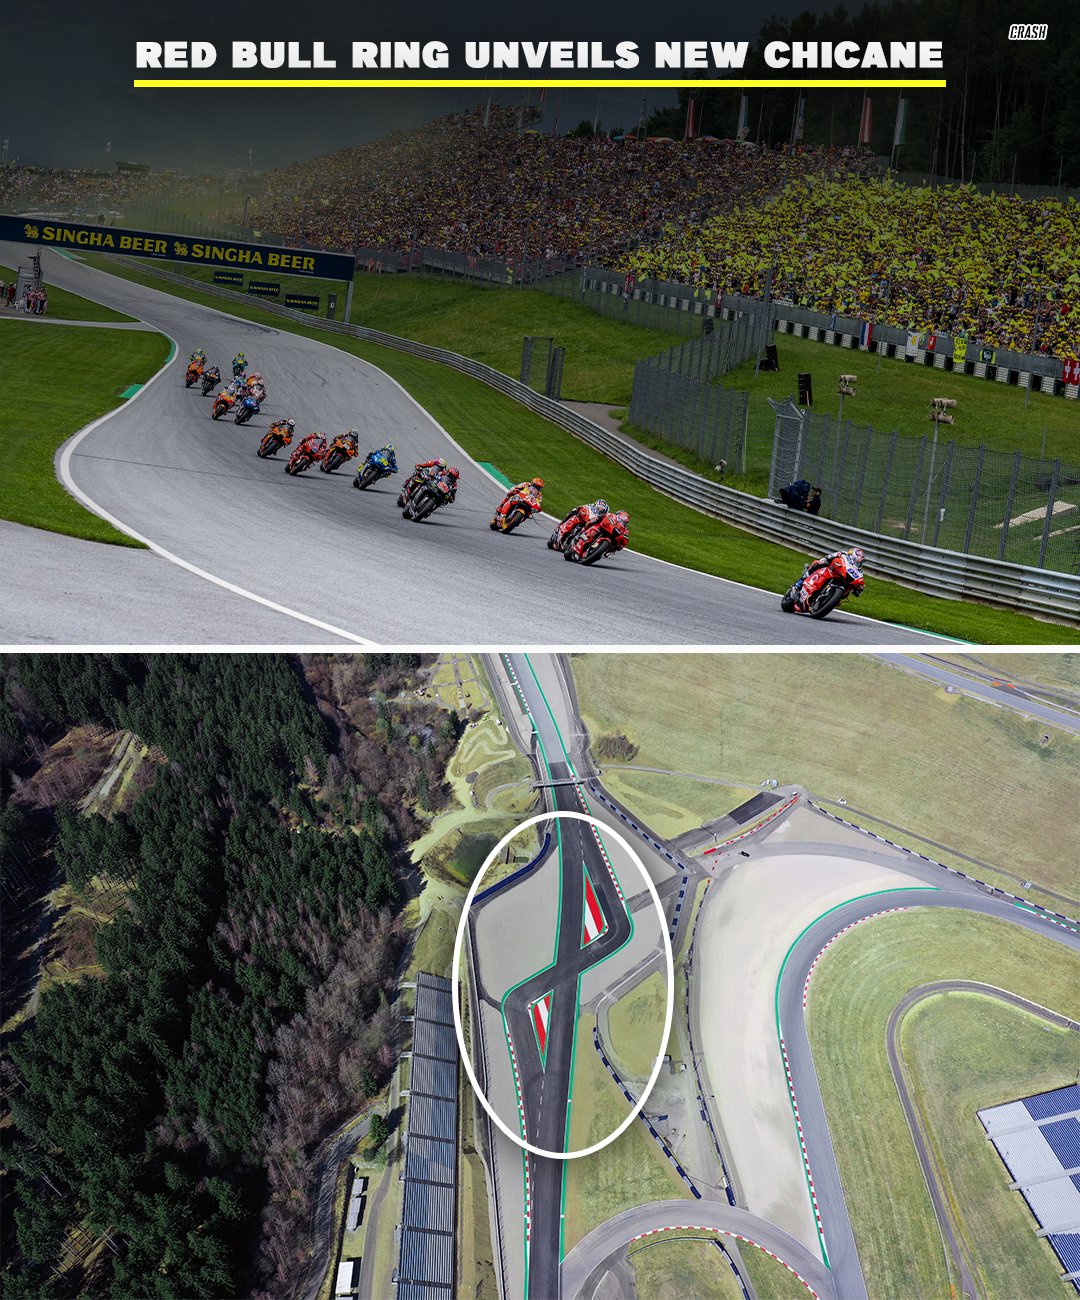 afwijzing binnenkomst stroomkring Crash MotoGP on X: "The Red Bull Ring's track modifications to Turn 2 have  been finished with a new chicane has added for safety. “Reduced speed was  needed in #MotoGP in this